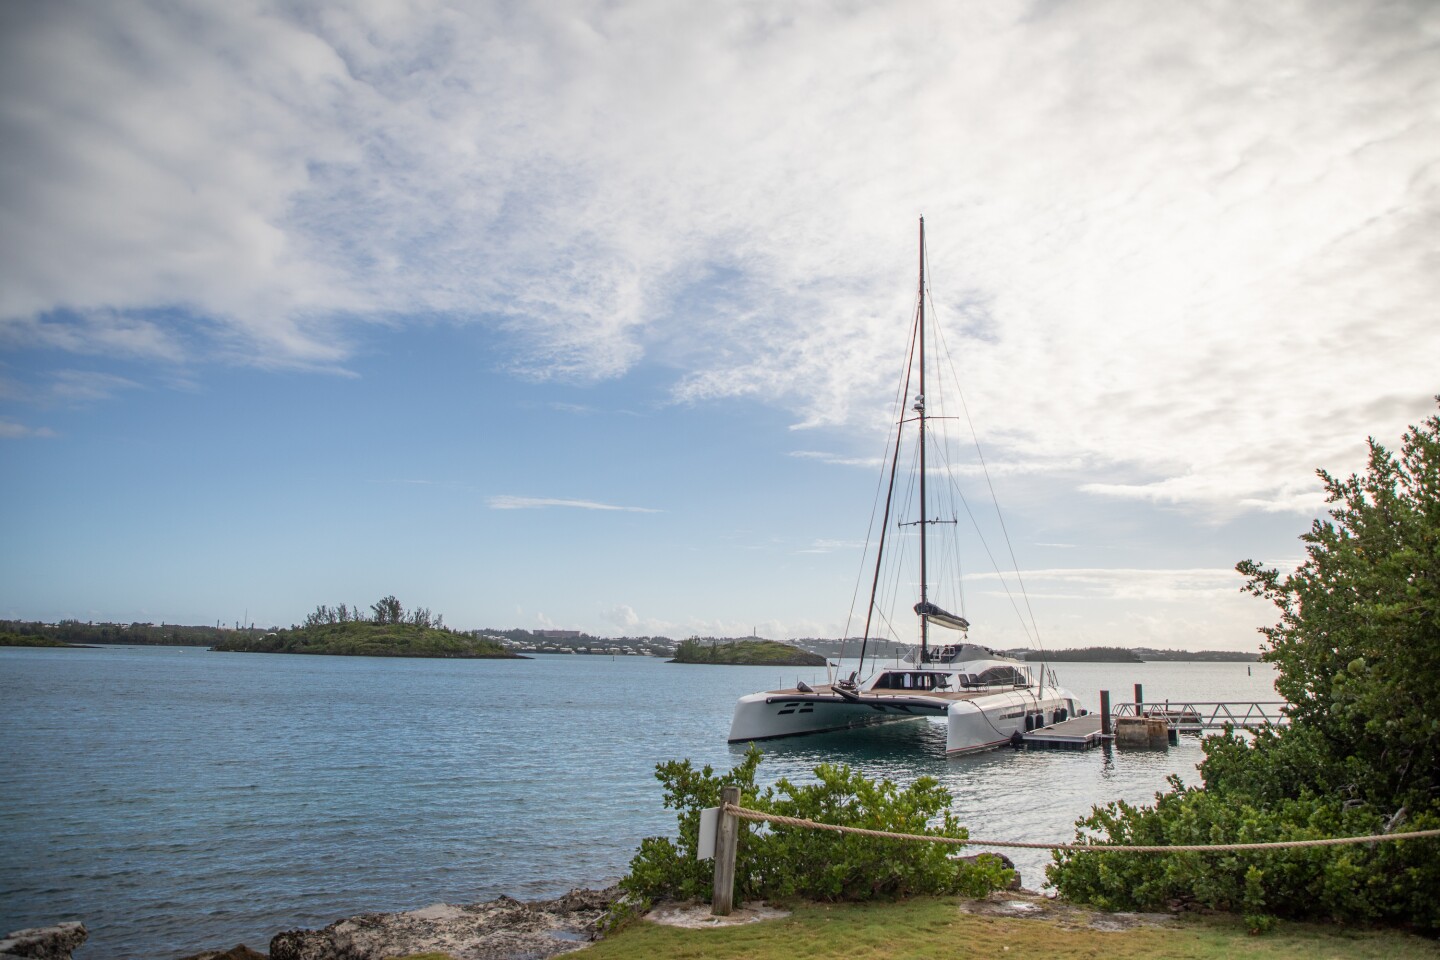 <h2>Hawkins Island, Bermuda</h2> <ul>   <li><b>Location: </b>Bermuda </li>   <li><b>Why we love it: </b>Complimentary use of a sailboat, private beachfront, room for 16 </li>   <li><a class="Link" href="https://www.hawkins.bm" rel="noopener"><b>Book now</b></a> </li>  </ul> <p>Bermuda, with its pink sand, intimate coves, and impressive dining, is a quick flight from most eastern U.S. cities. Beyond the big resorts, there’s a lesser-known private island option that offers even more exclusivity: the 25-acre Hawkins Island, with its woodland reserve and beach overlooking the Great Sound. You can buy out the entire island for up to 16 guests across two accommodations, the 8-person Main Villa and the 8-person Guard House. The stay includes all boat transfers to the marina, a laundry facility, and water sports equipment, including kayaks, paddleboards, and a small sailboat. </p>